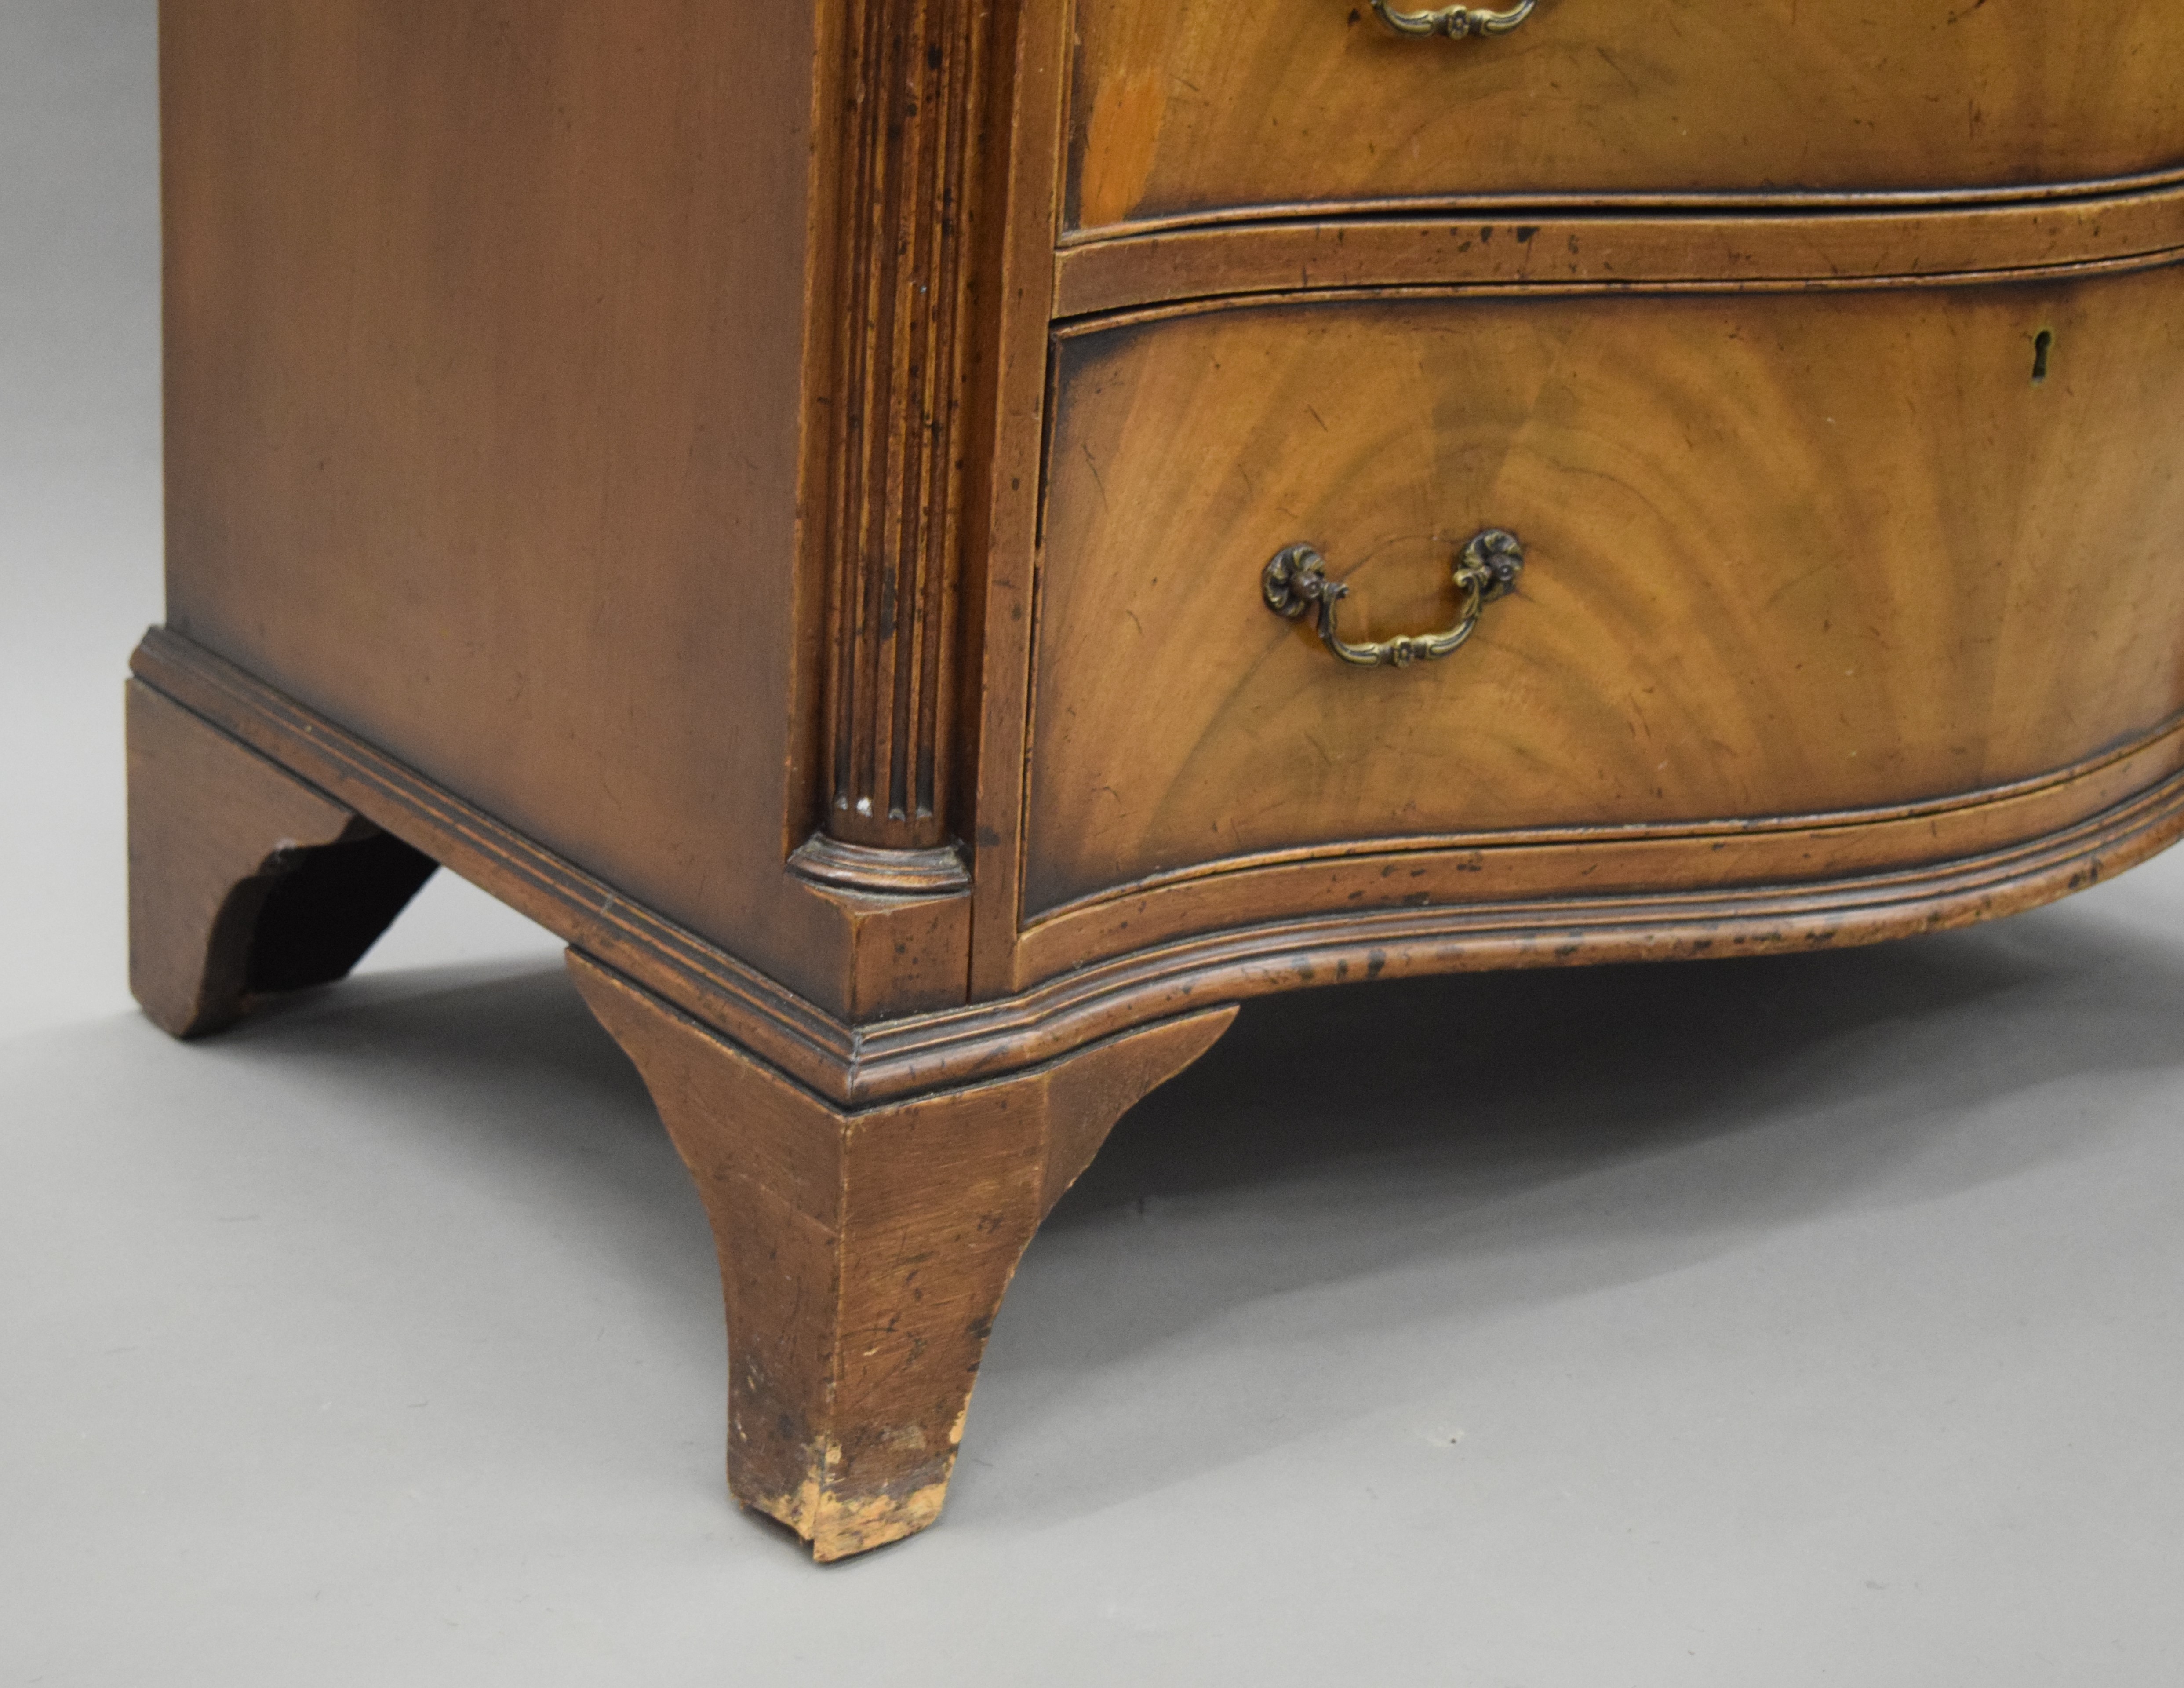 A George III style mahogany Serpentine chest of drawers. 83.5 cm wide, 100 cm high, 49 cm deep. - Image 6 of 6